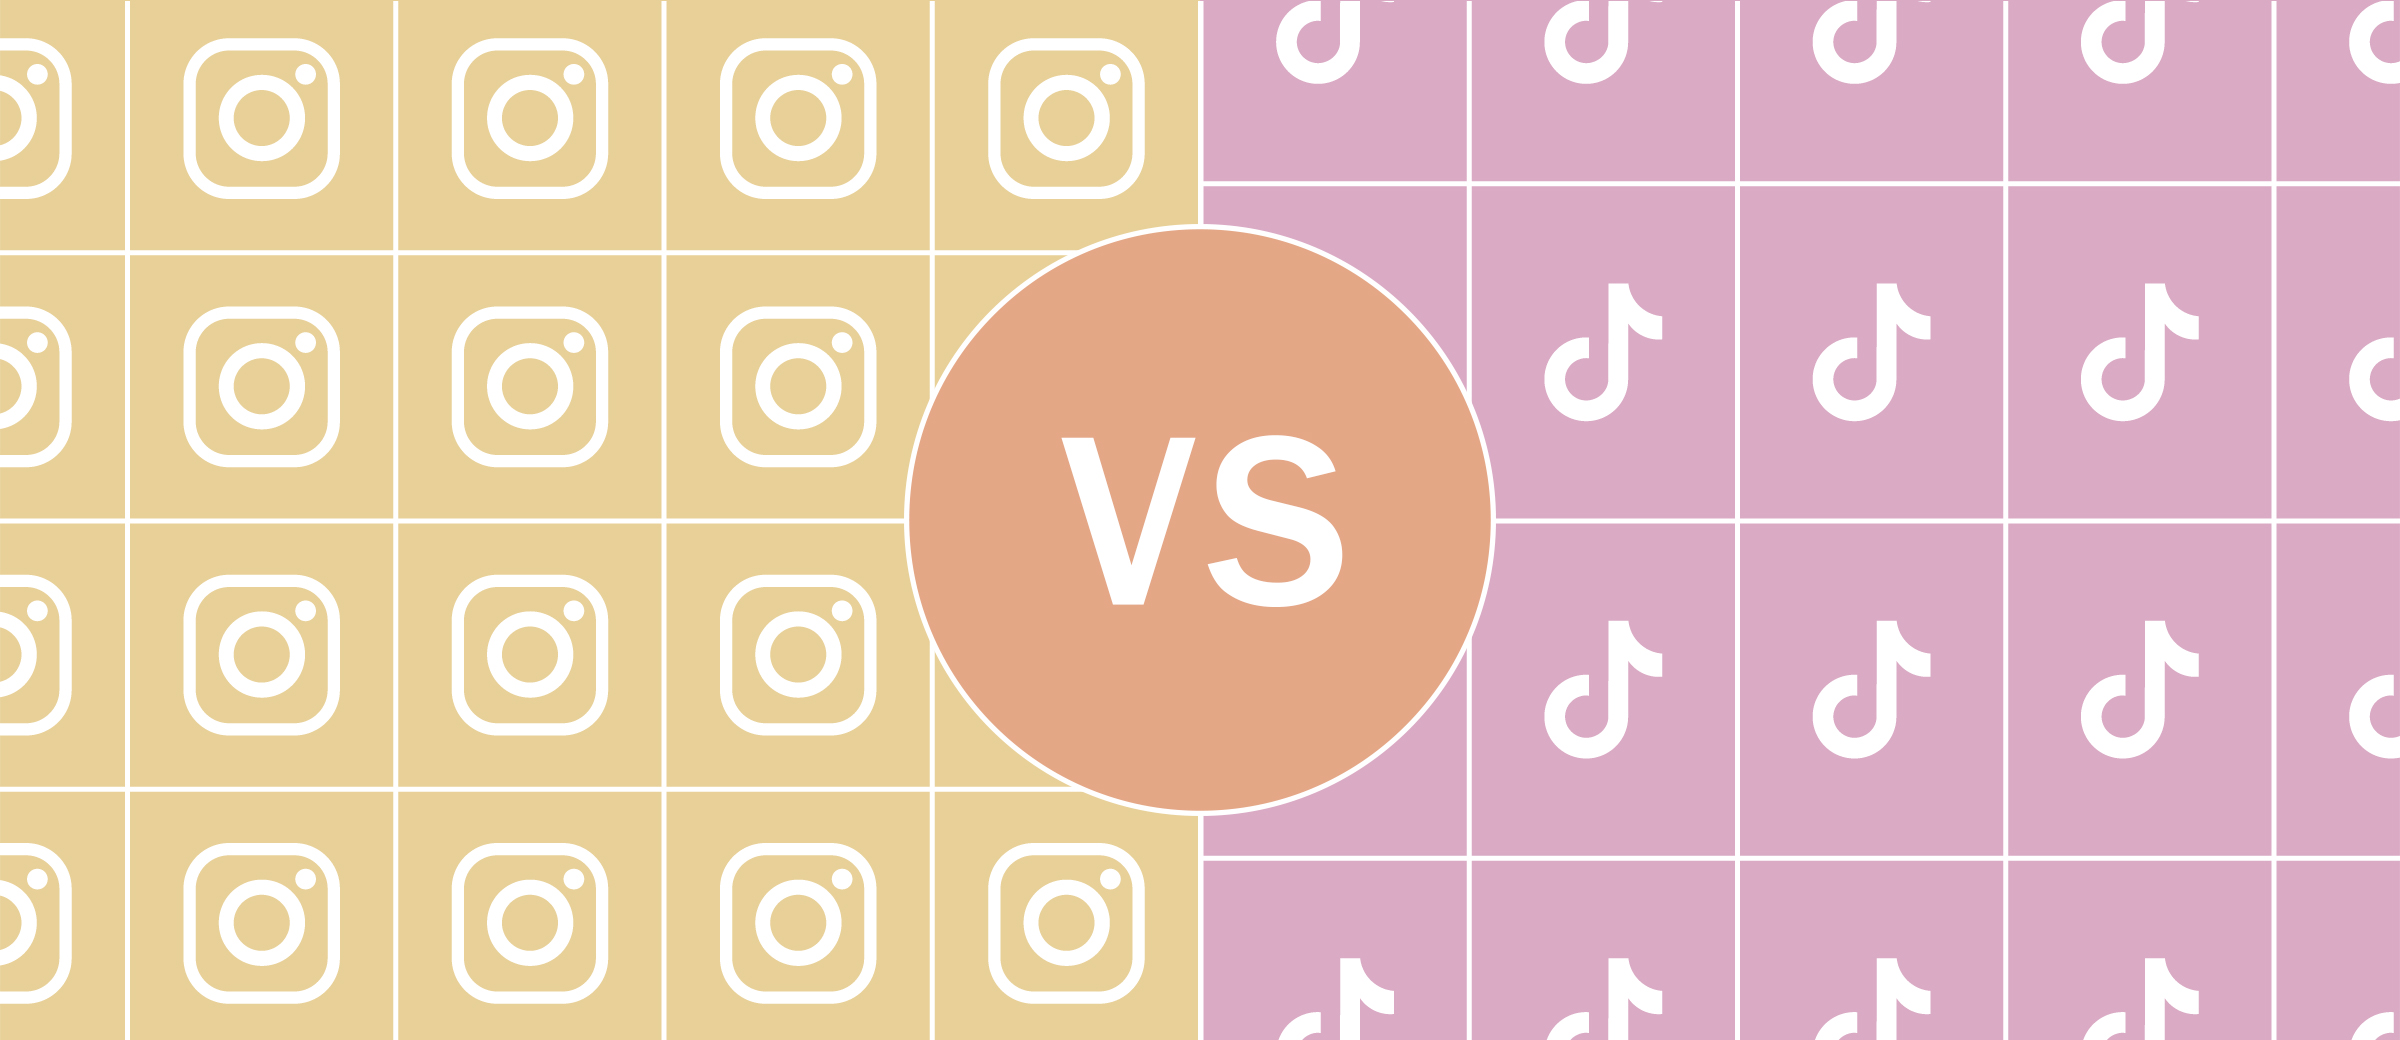 TikTok Vs. Instagram: What Types Of Content Should You Post